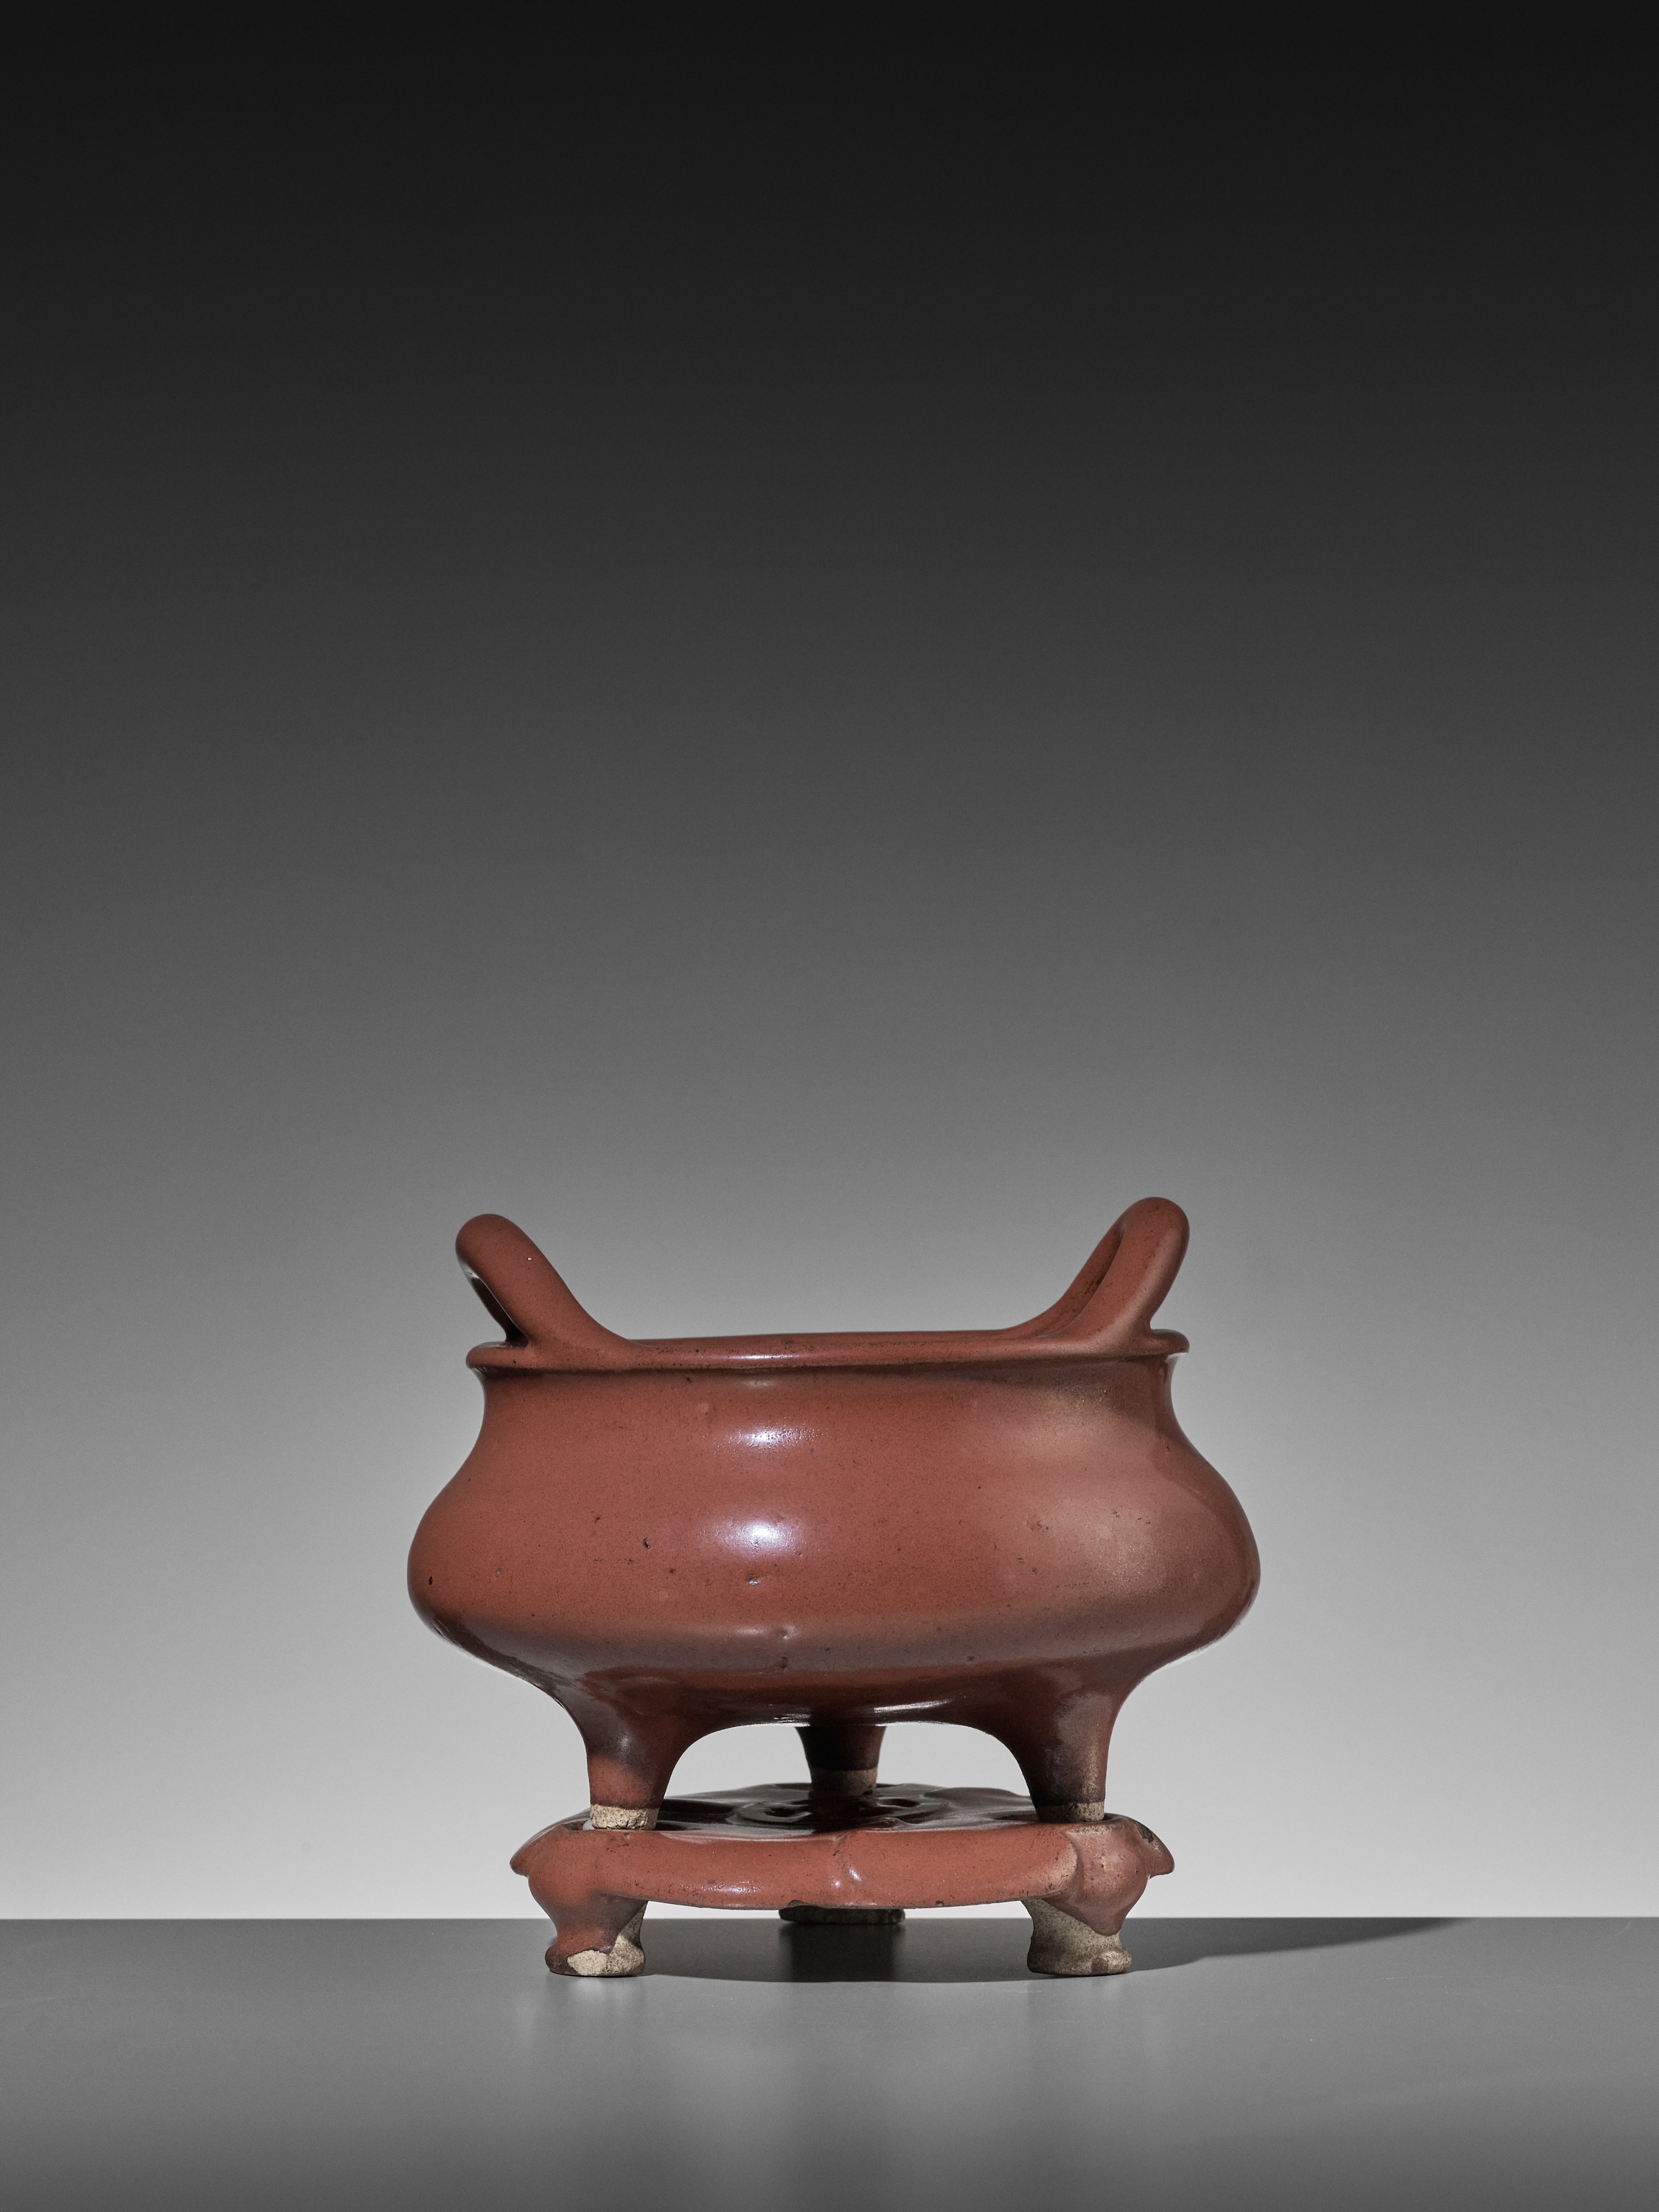 A RARE IRON-RUST GLAZED TRIPOD CENSER WITH MATCHING STAND, MID-QING - Image 8 of 12